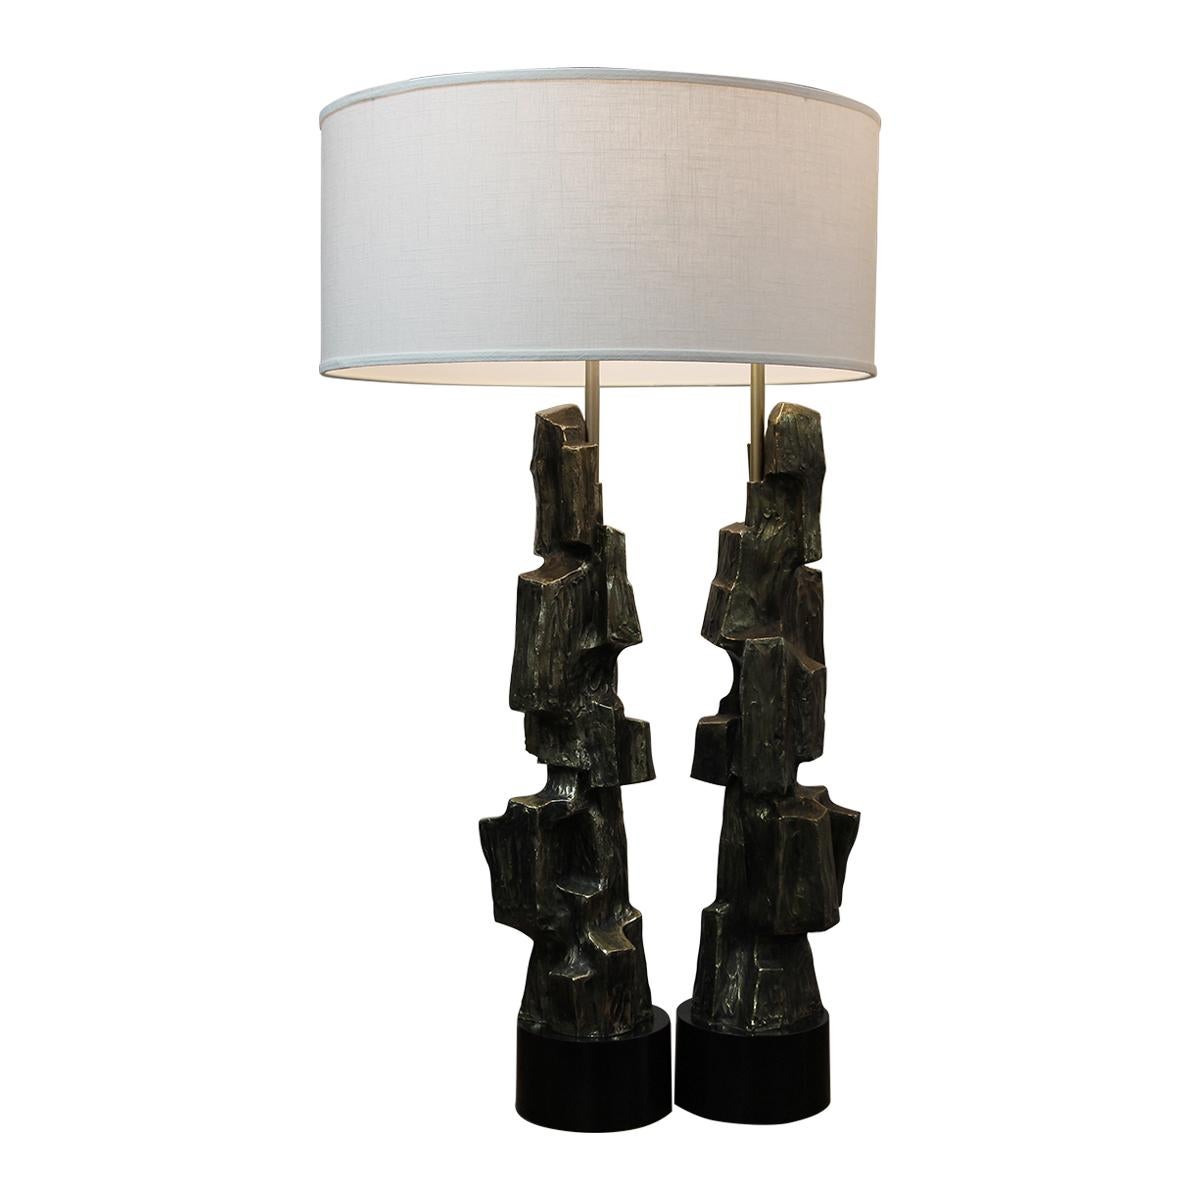 Pair of Brutalist Lamps by Richard Barr for Laurel Lamp Co.